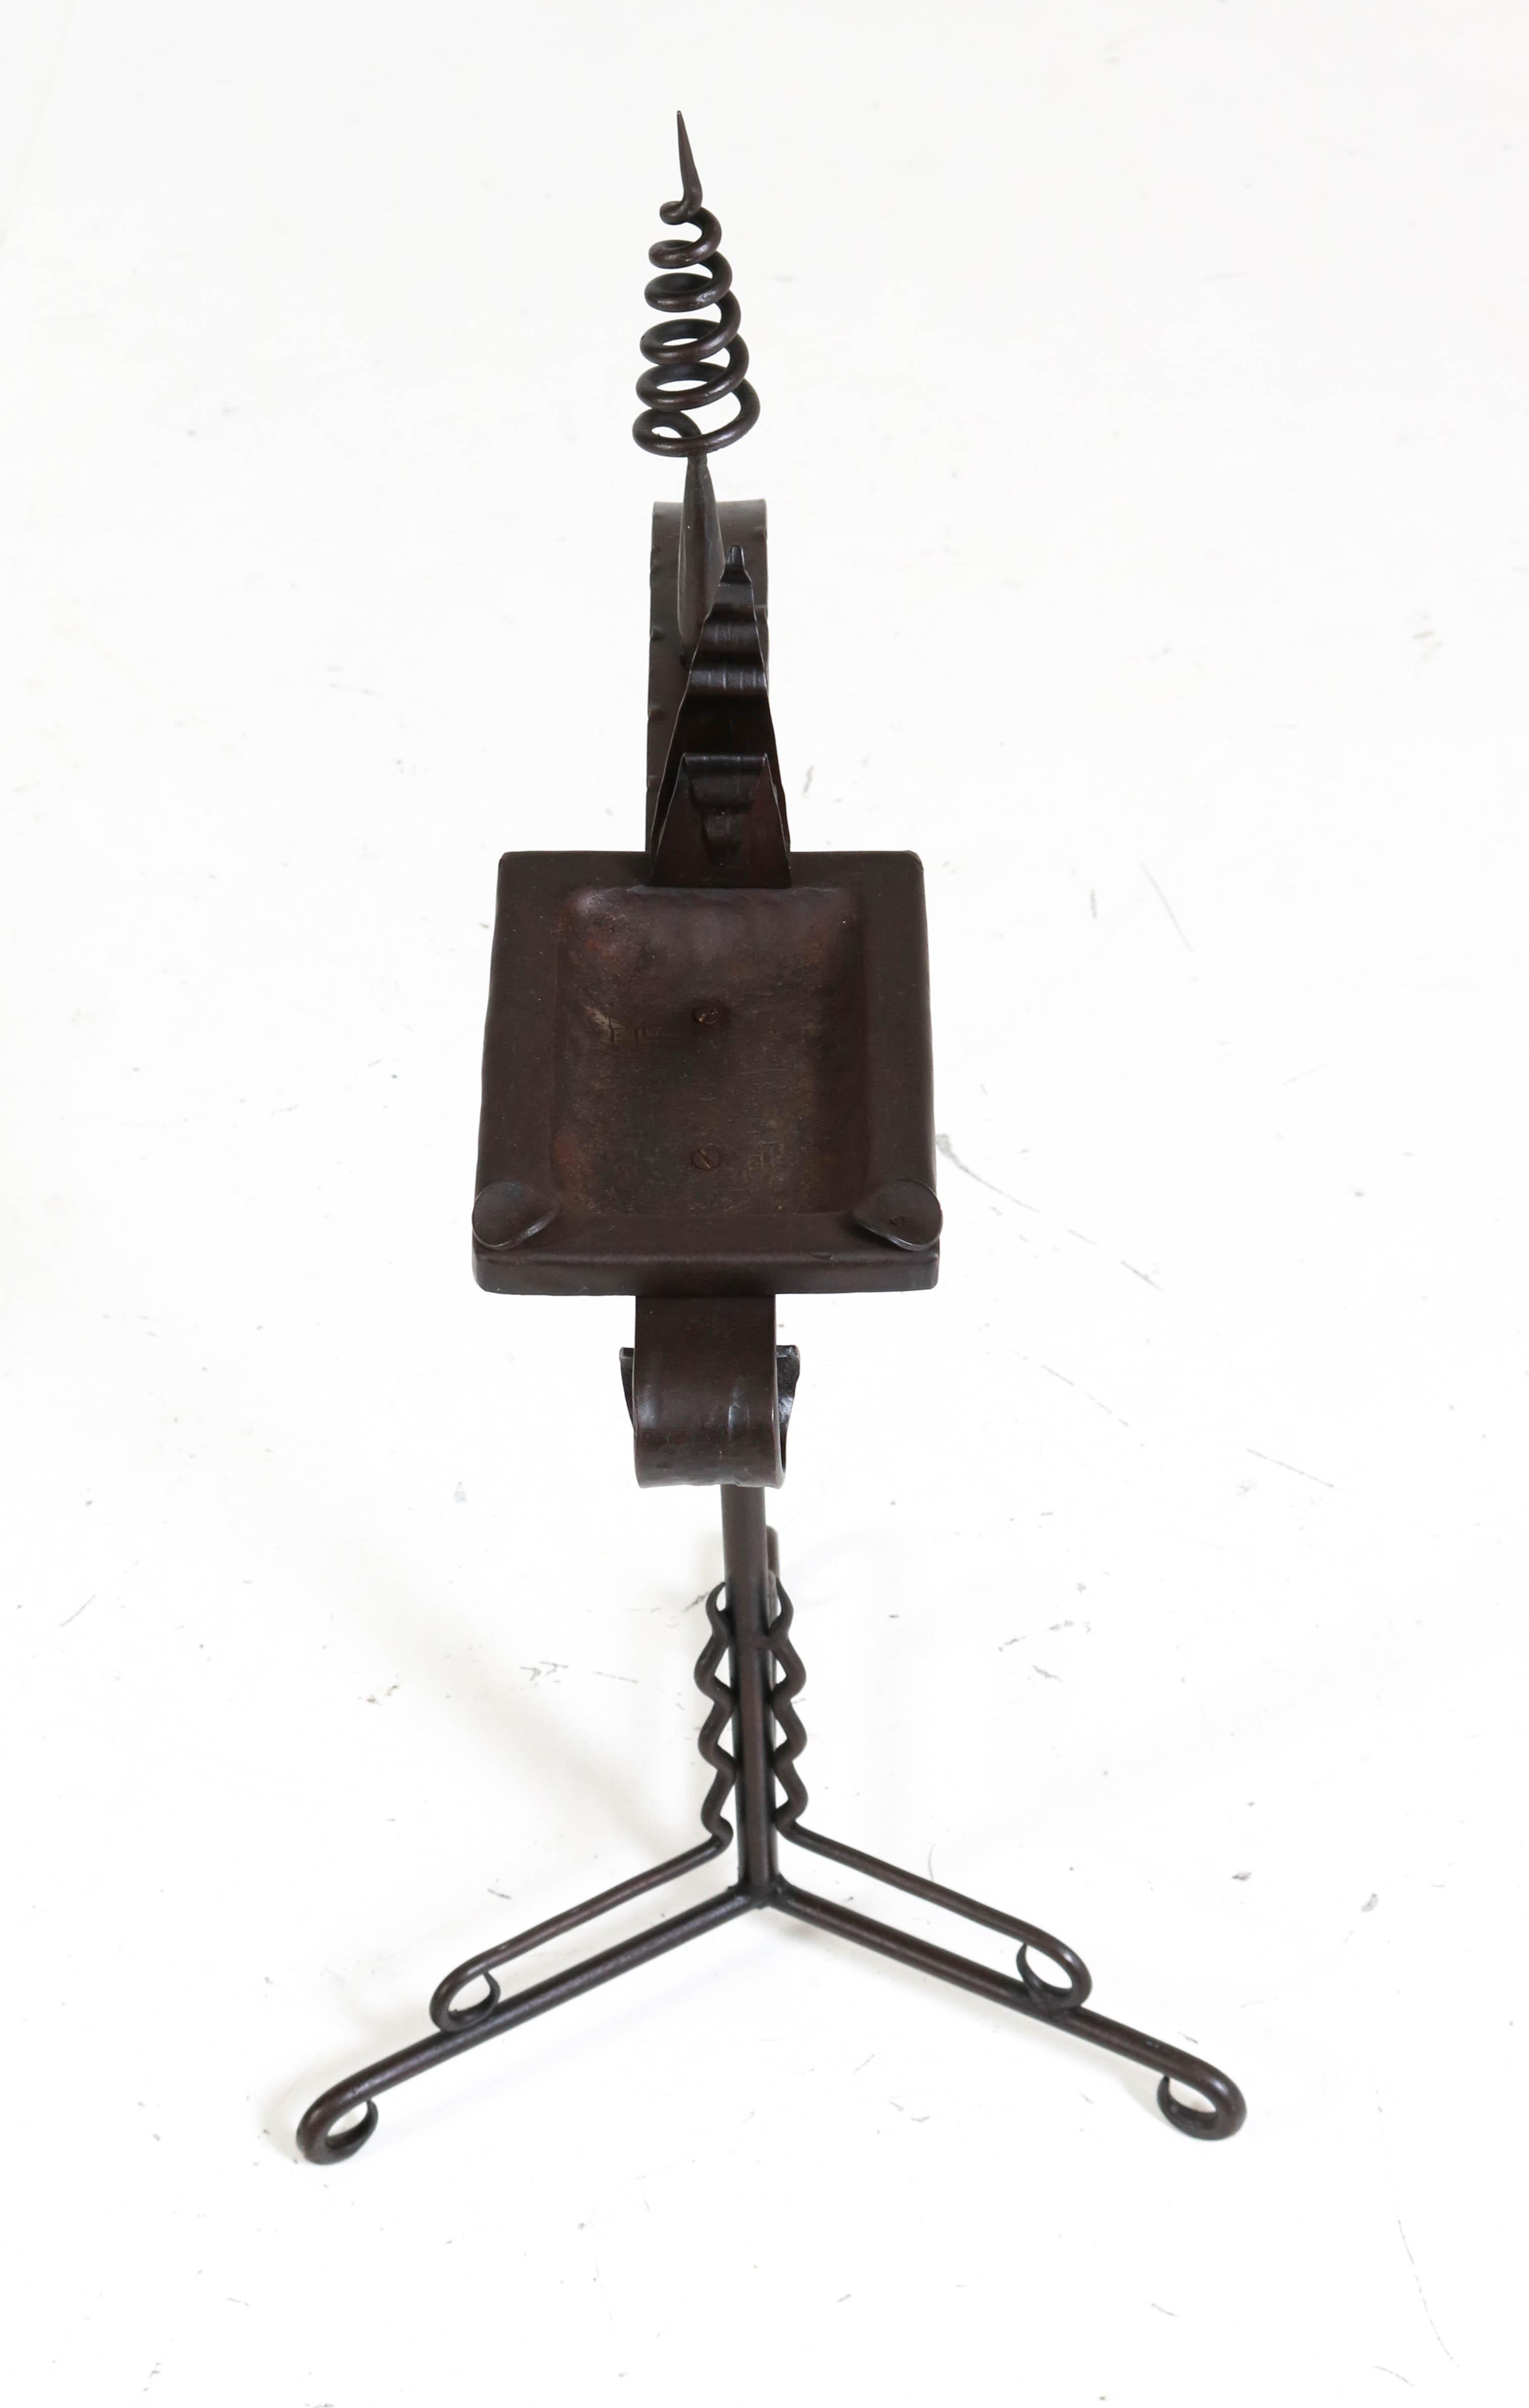 Wonderful and rare Art Deco Amsterdam School ashtray stand.
Design by J. Boerman.
Striking Dutch design from the twenties.
Wrought iron with decorative lining.
In very good original condition with a beautiful patina.